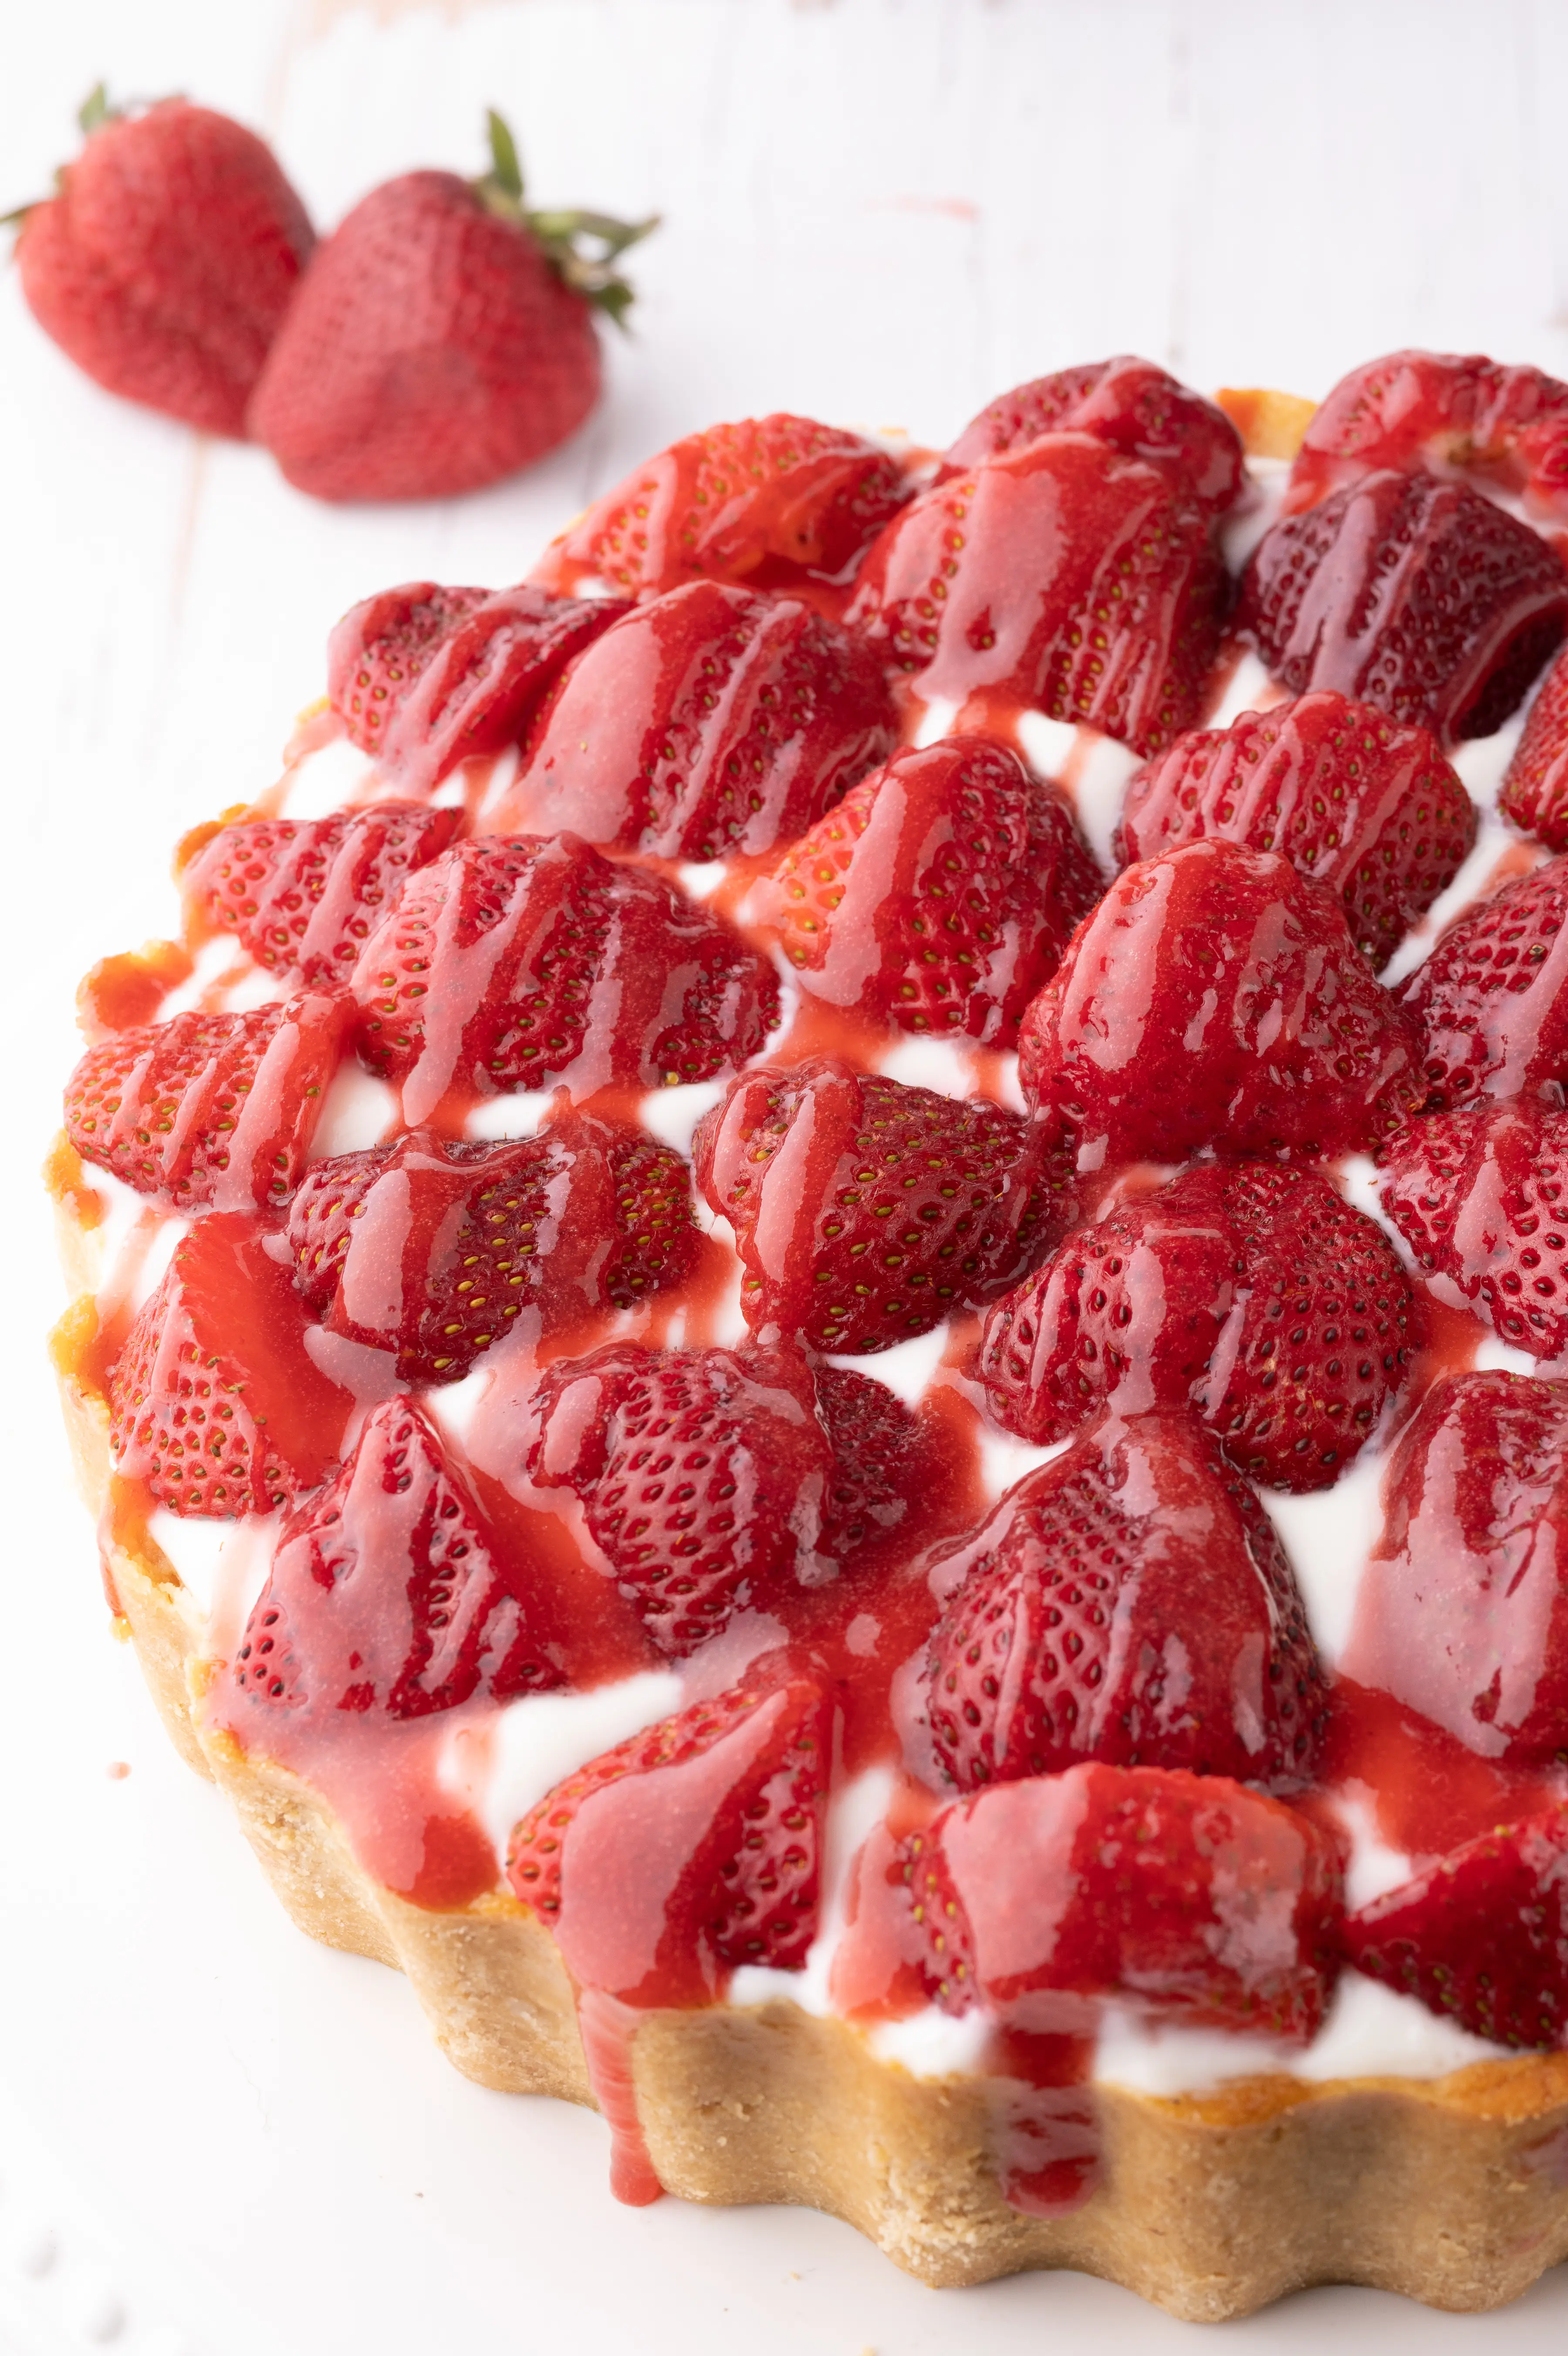 Keto strawberry cheesecake with fresh strawberries and drizzled with strawberry sauce.  